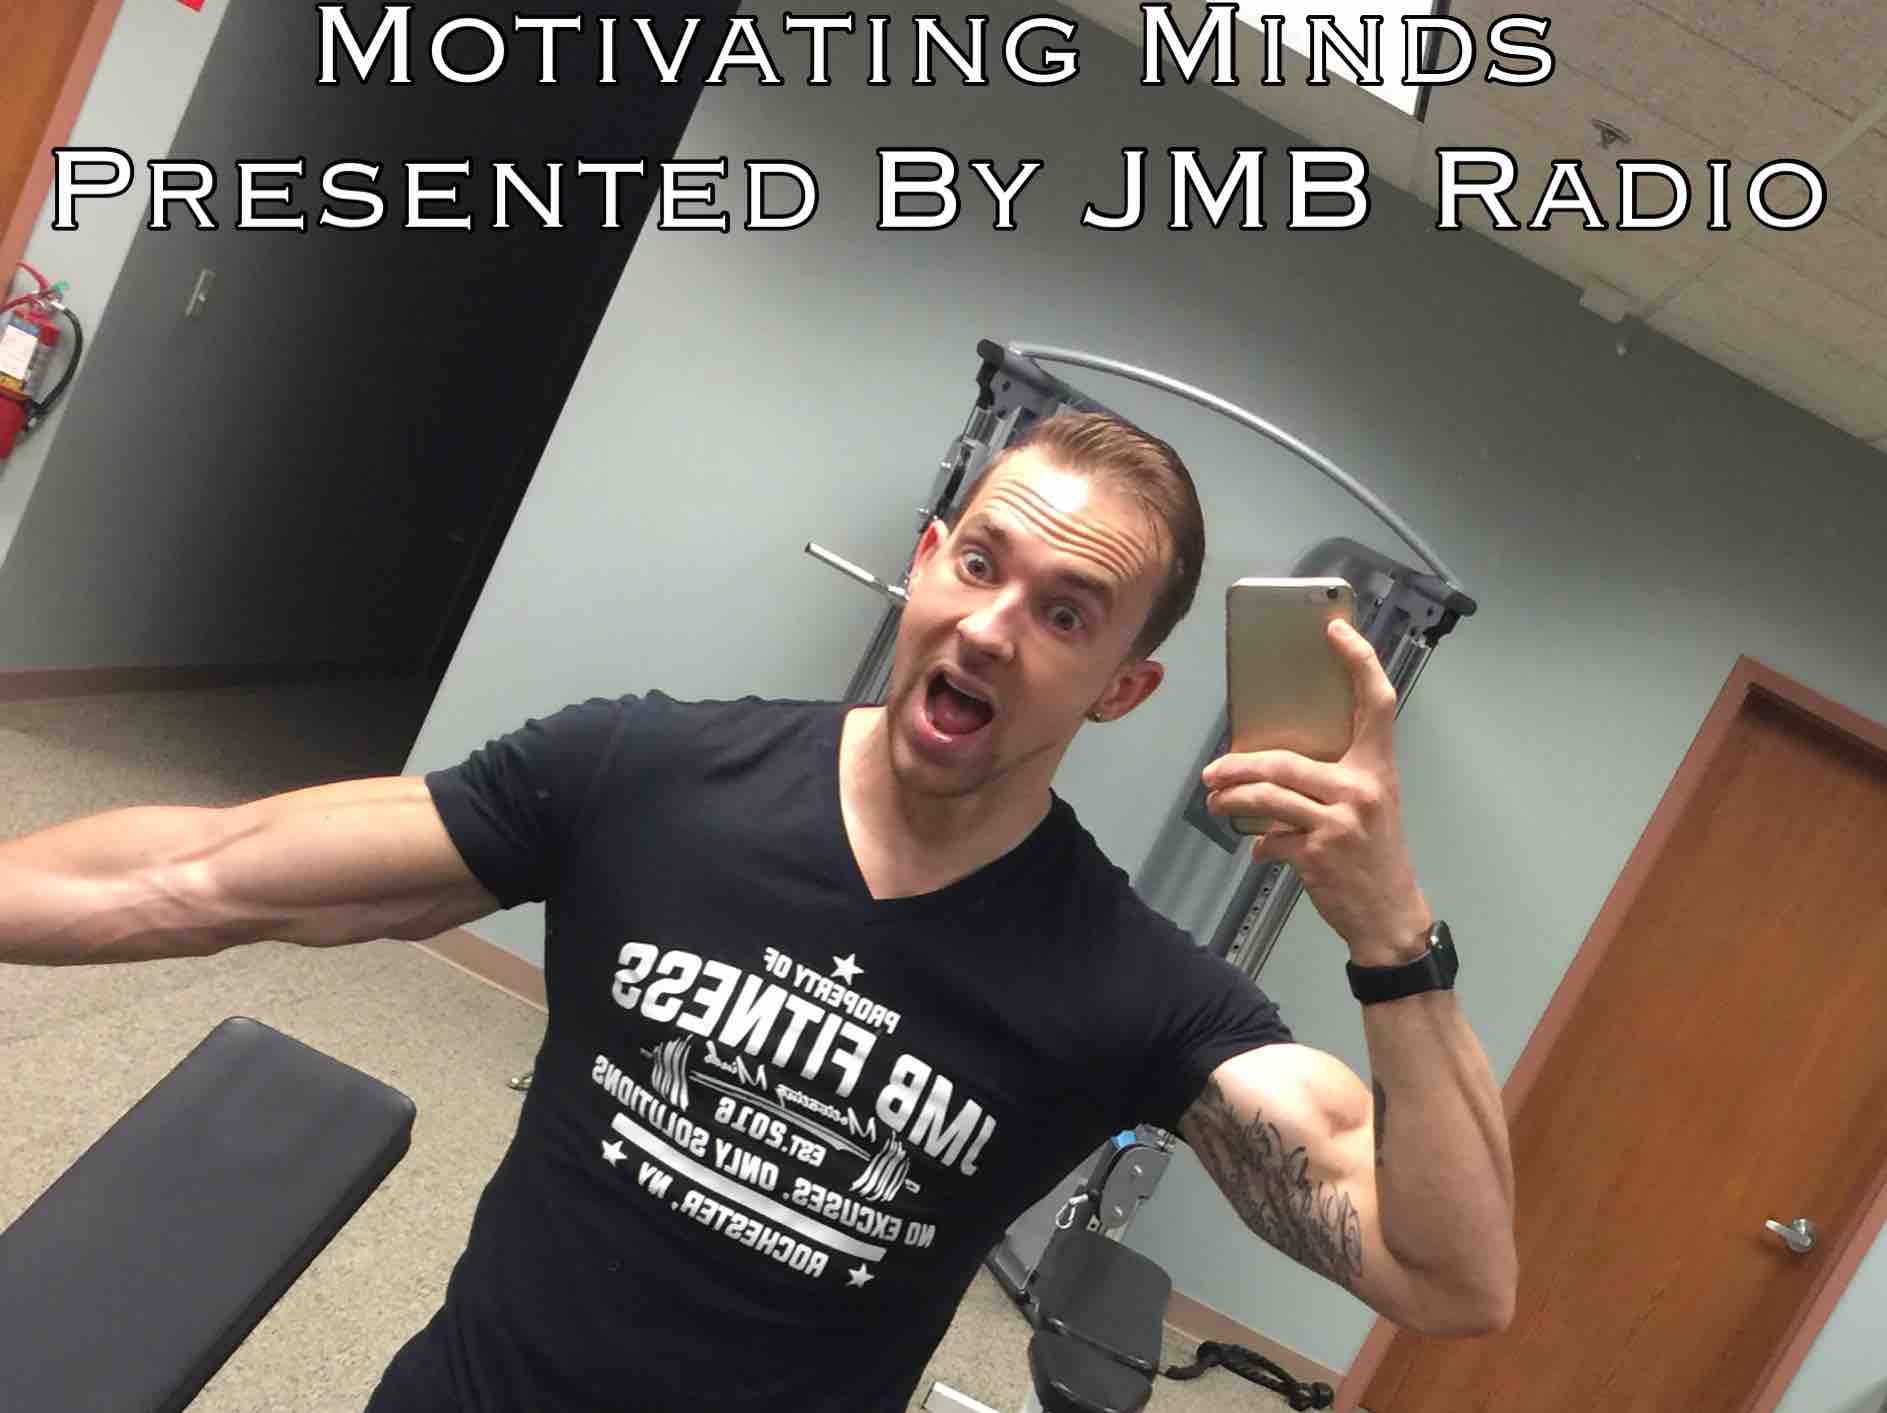 Motivating Minds: Episode 54: Just A Piece "Motivation Must Be Daily"